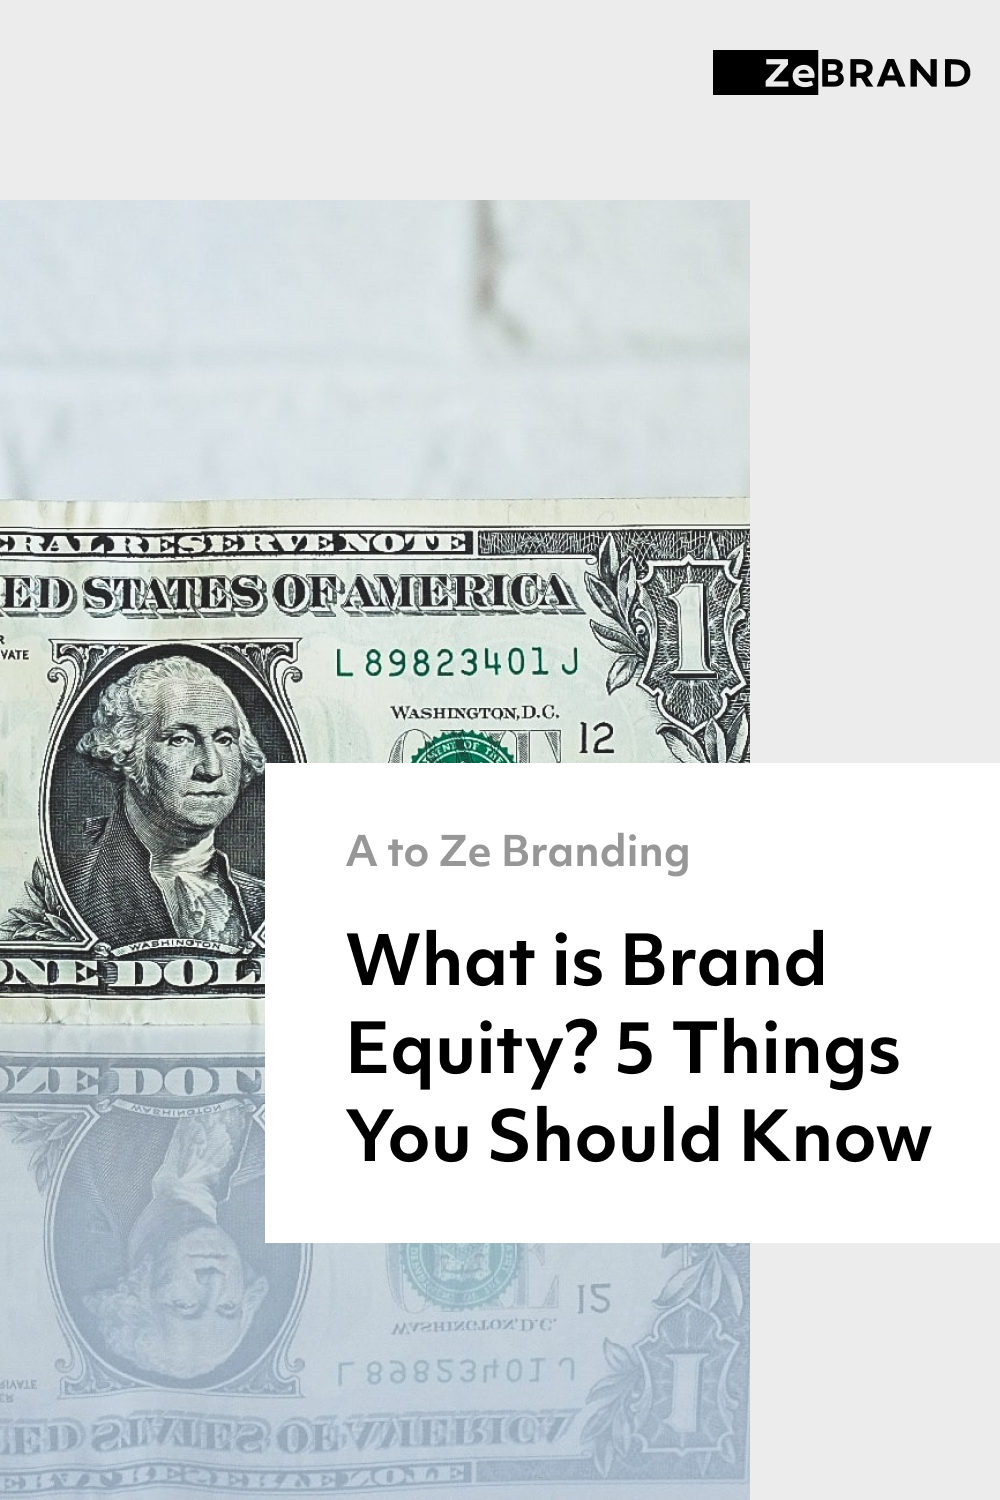 What is Brand Equity? 5 Things You Should Know